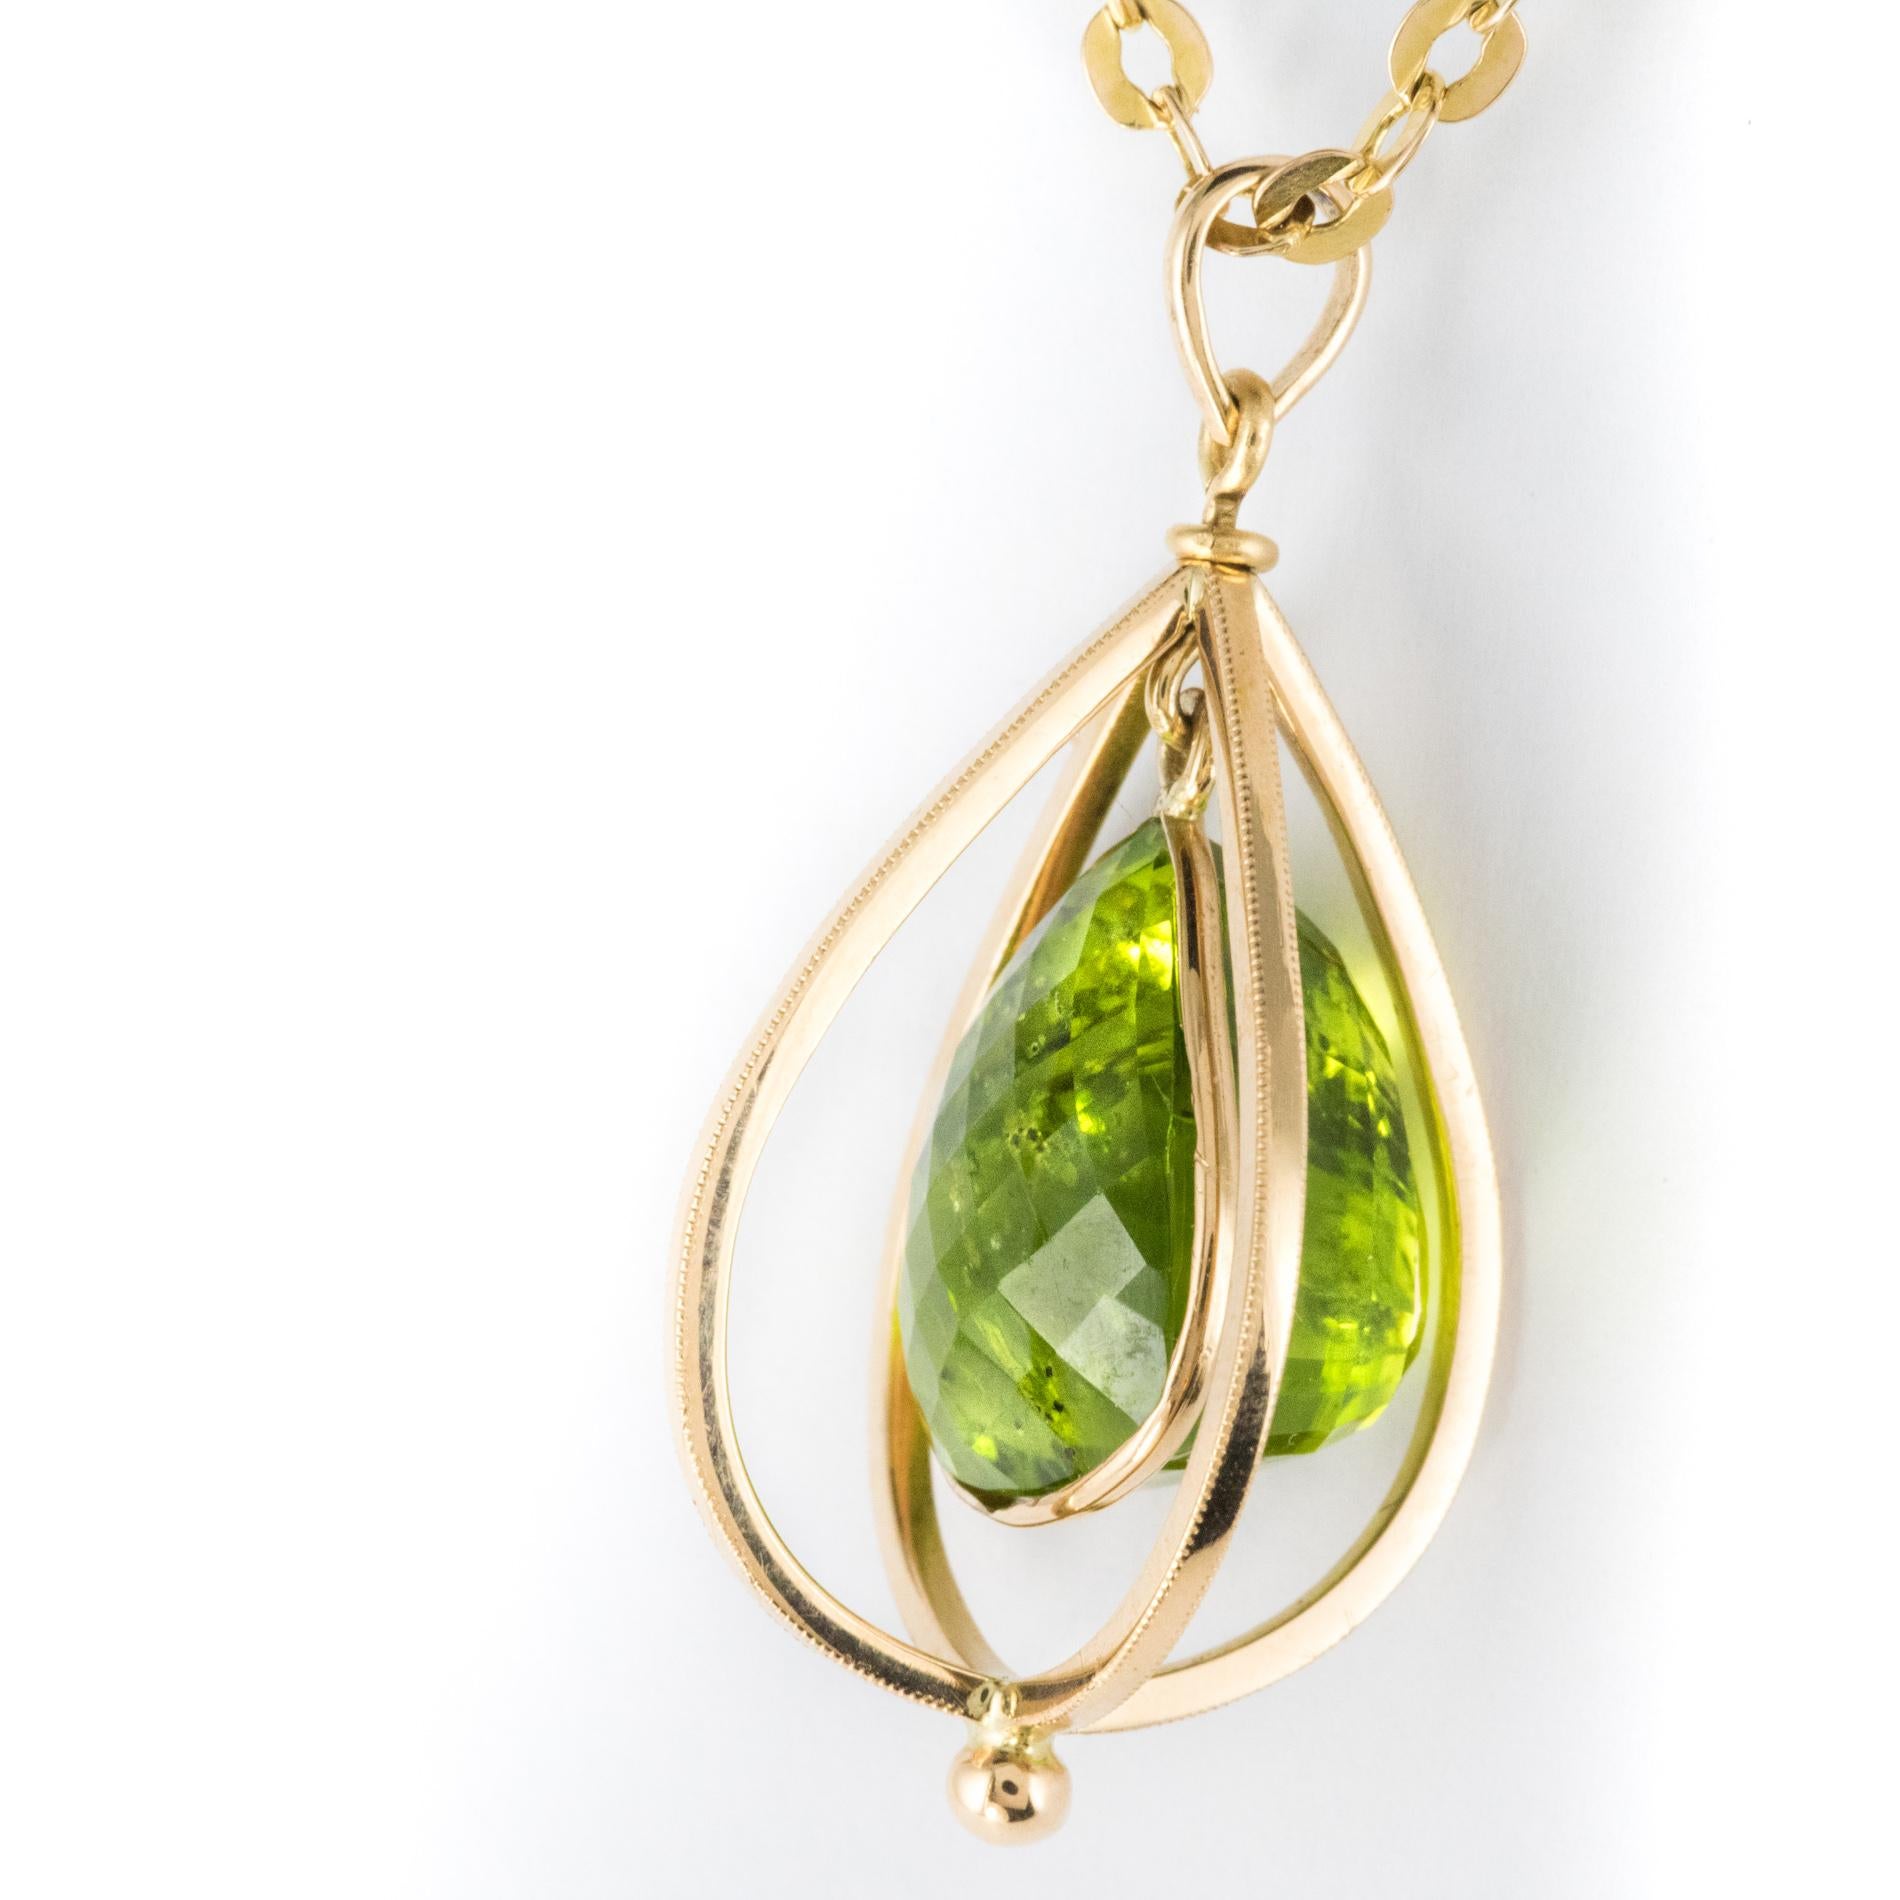 Women's New 12, 1 Carats Peridot Pendant Chain Set with Opals Necklace